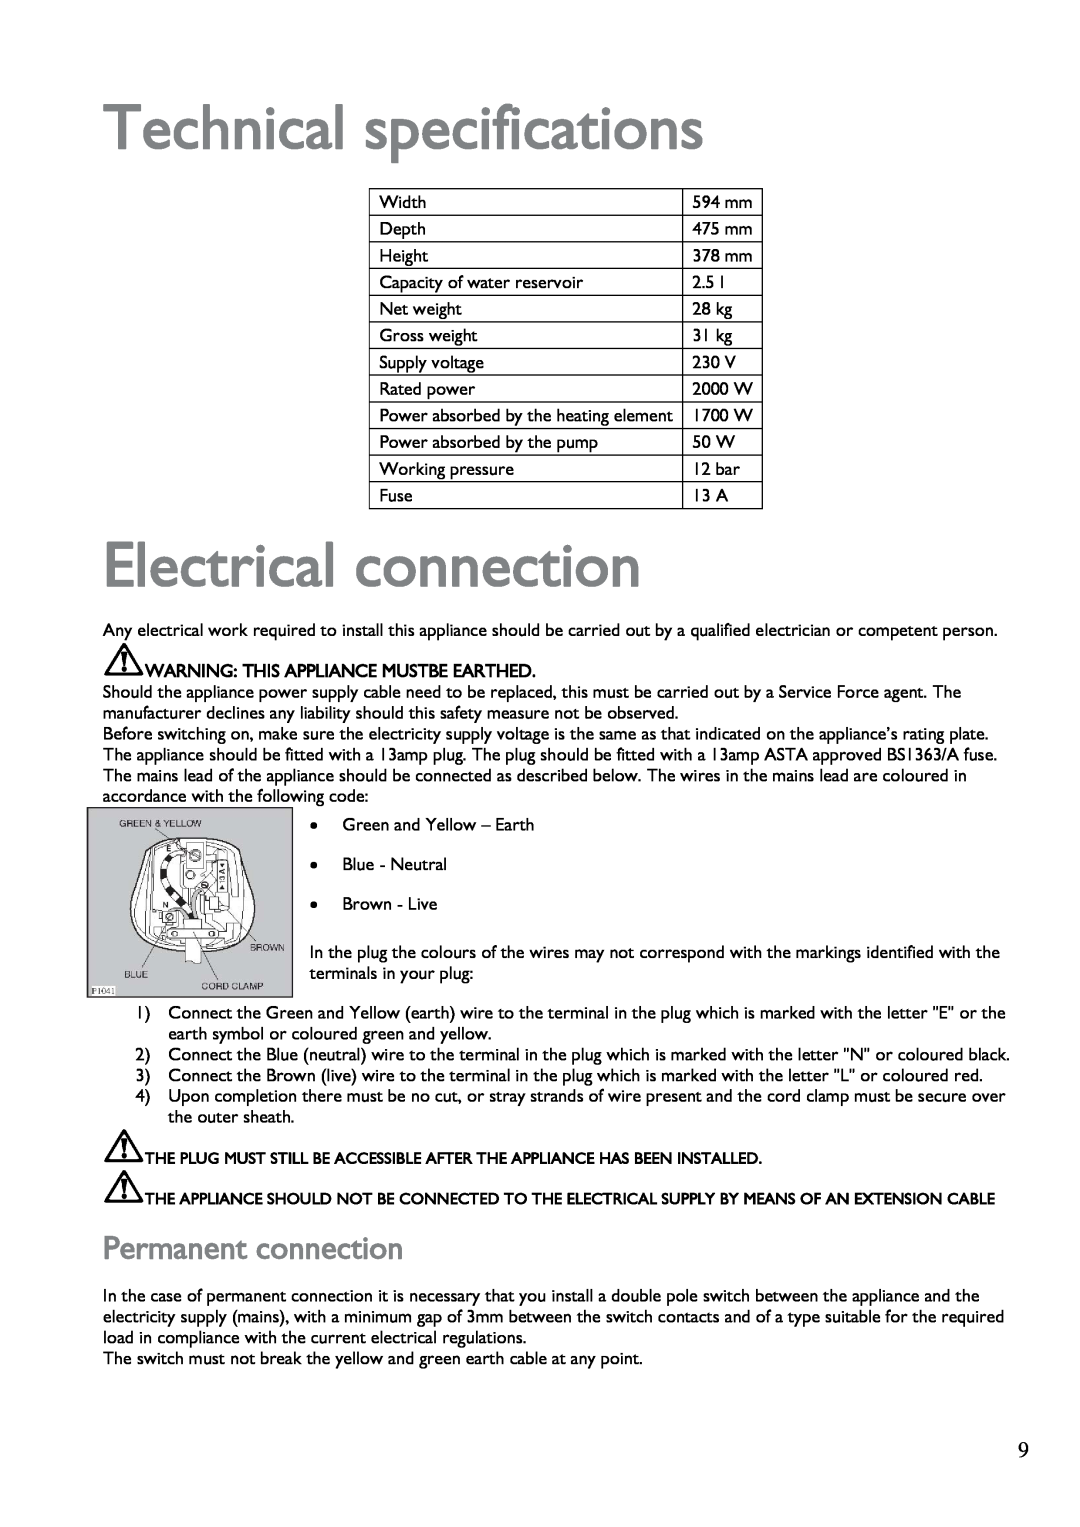 John Lewis JLBICM 01 instruction manual Technical specifications, Electrical connection, Permanent connection 